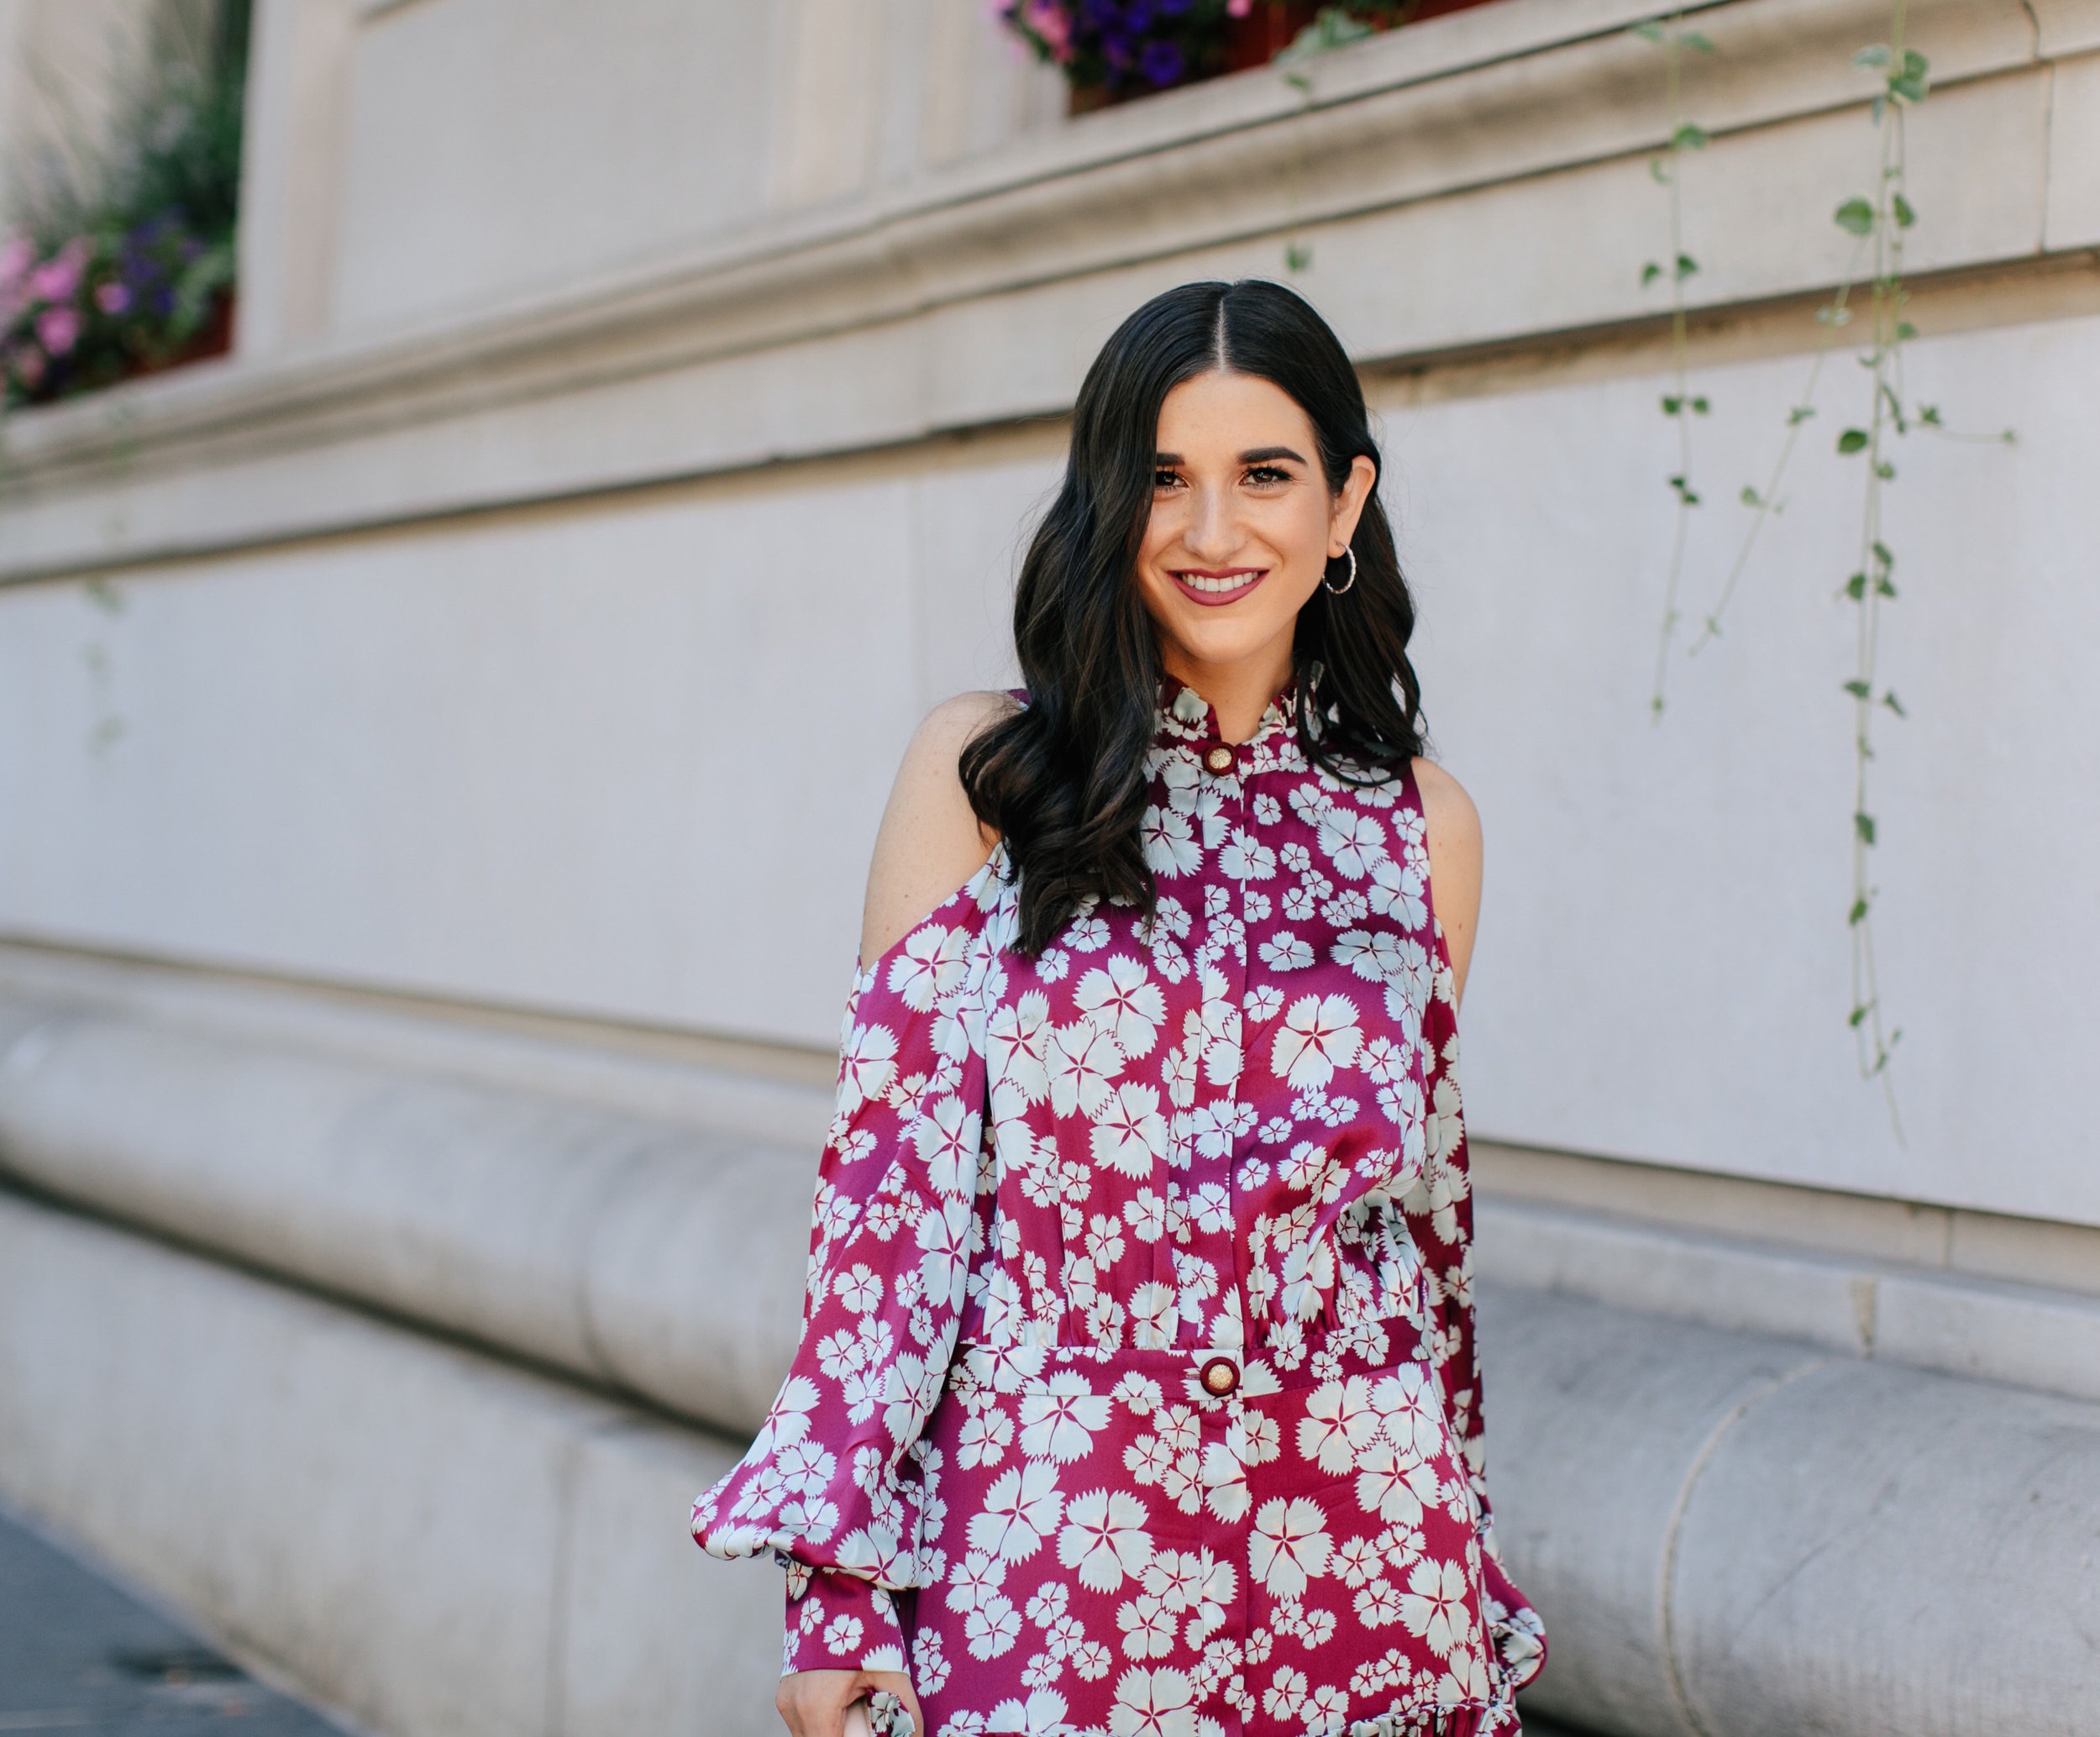 A Blogger’s Guide To Turning Your S.O. Into Your Photographer Cold Shoulder Floral Dress Esther Santer Fashion Blog NYC Street Style Blogger Outfit OOTD Trendy Designer Nordstrom Strappy Blush Pink Heels  Circle Bag Shopping Wavy Hair Diamond Jewelry.jpg